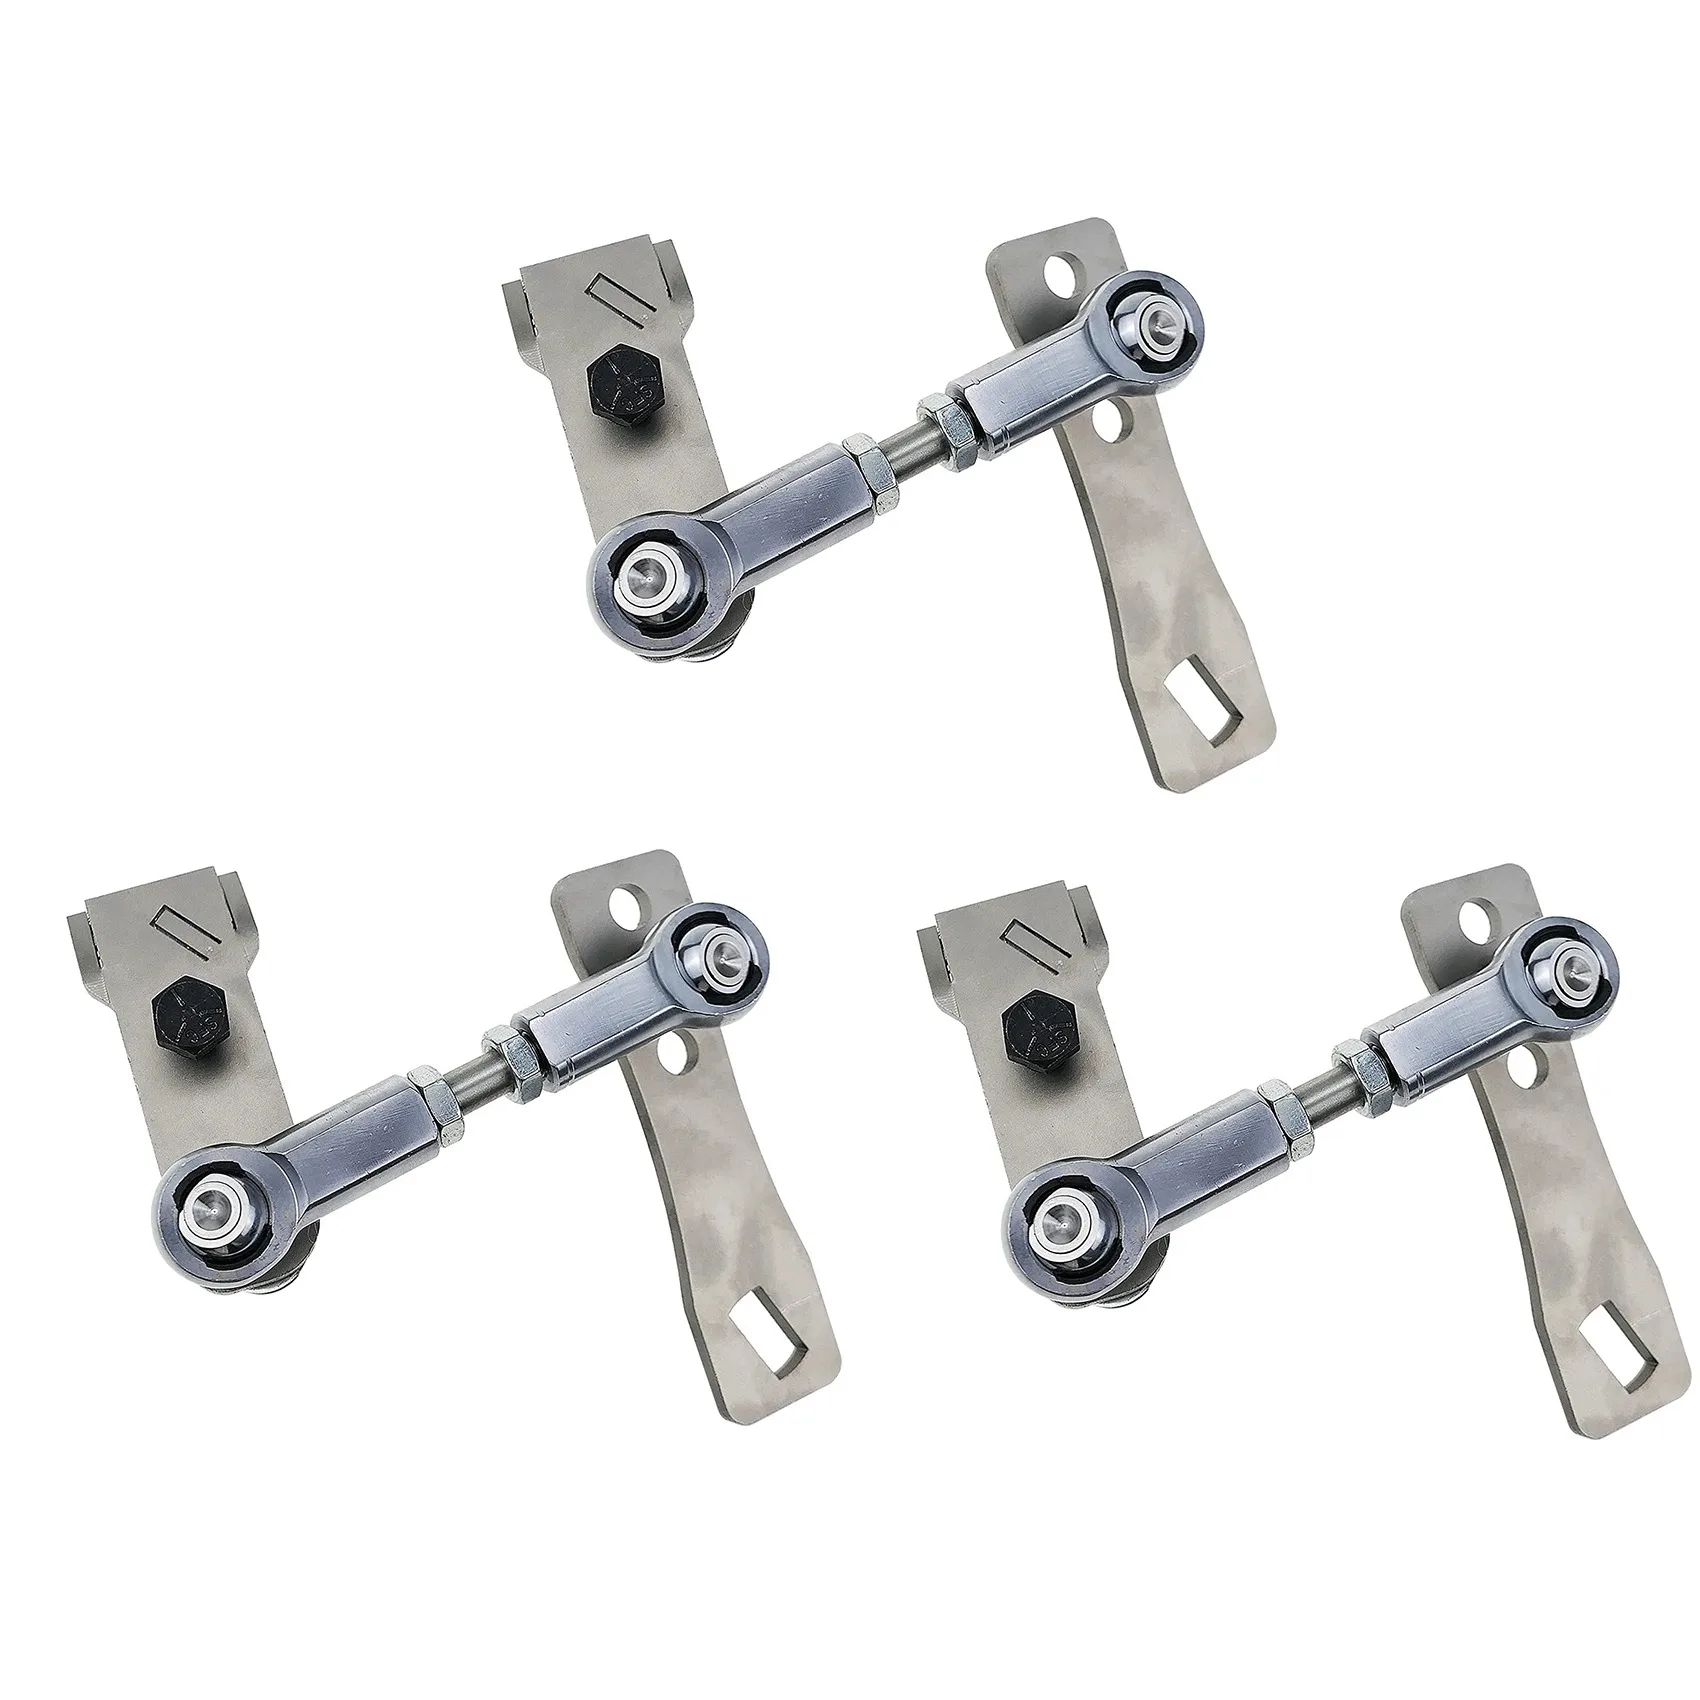 

3X Transfer Case Linkage Kit Fits for Jeep Cherokee XJ Comanche MJ 1986-2001 Easy to Install